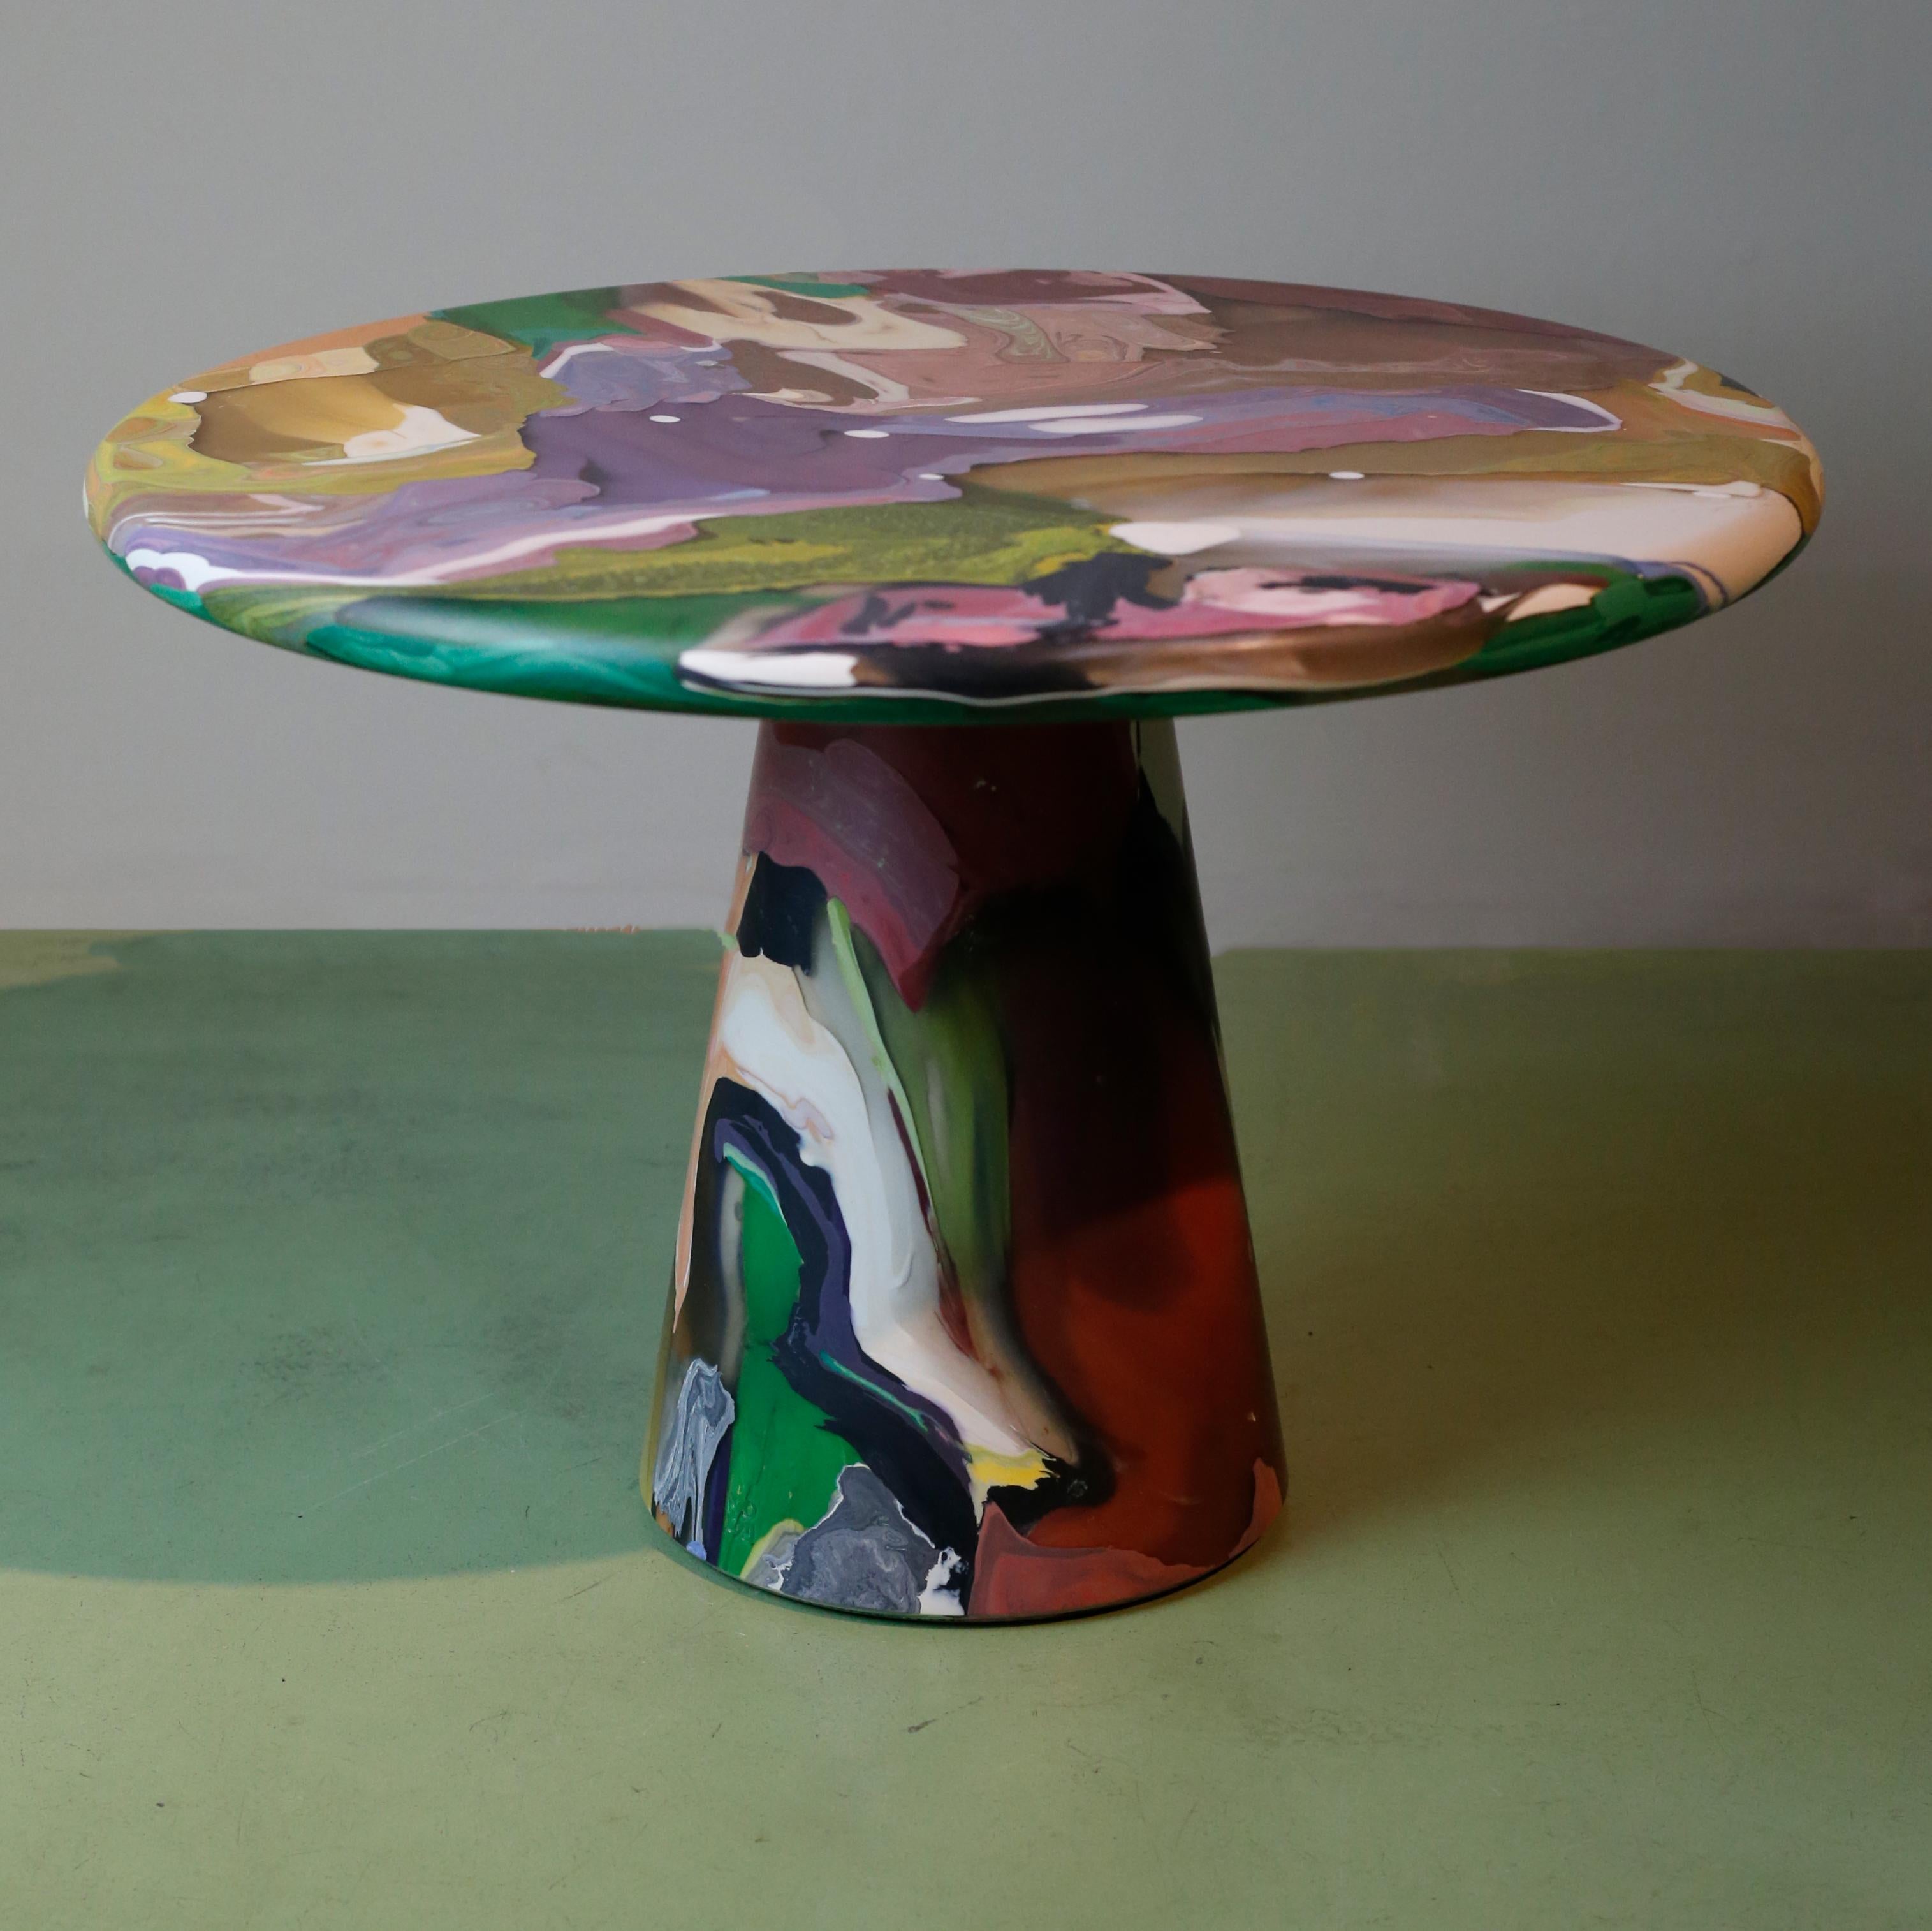 The Meltingpot table plays a keystone role in the circular design practice at Kooij. Discarded recycled plastic prototypes, production faults, and colour tests form the basis of the conglomerate Meltingpot. These multiform elements are curated and